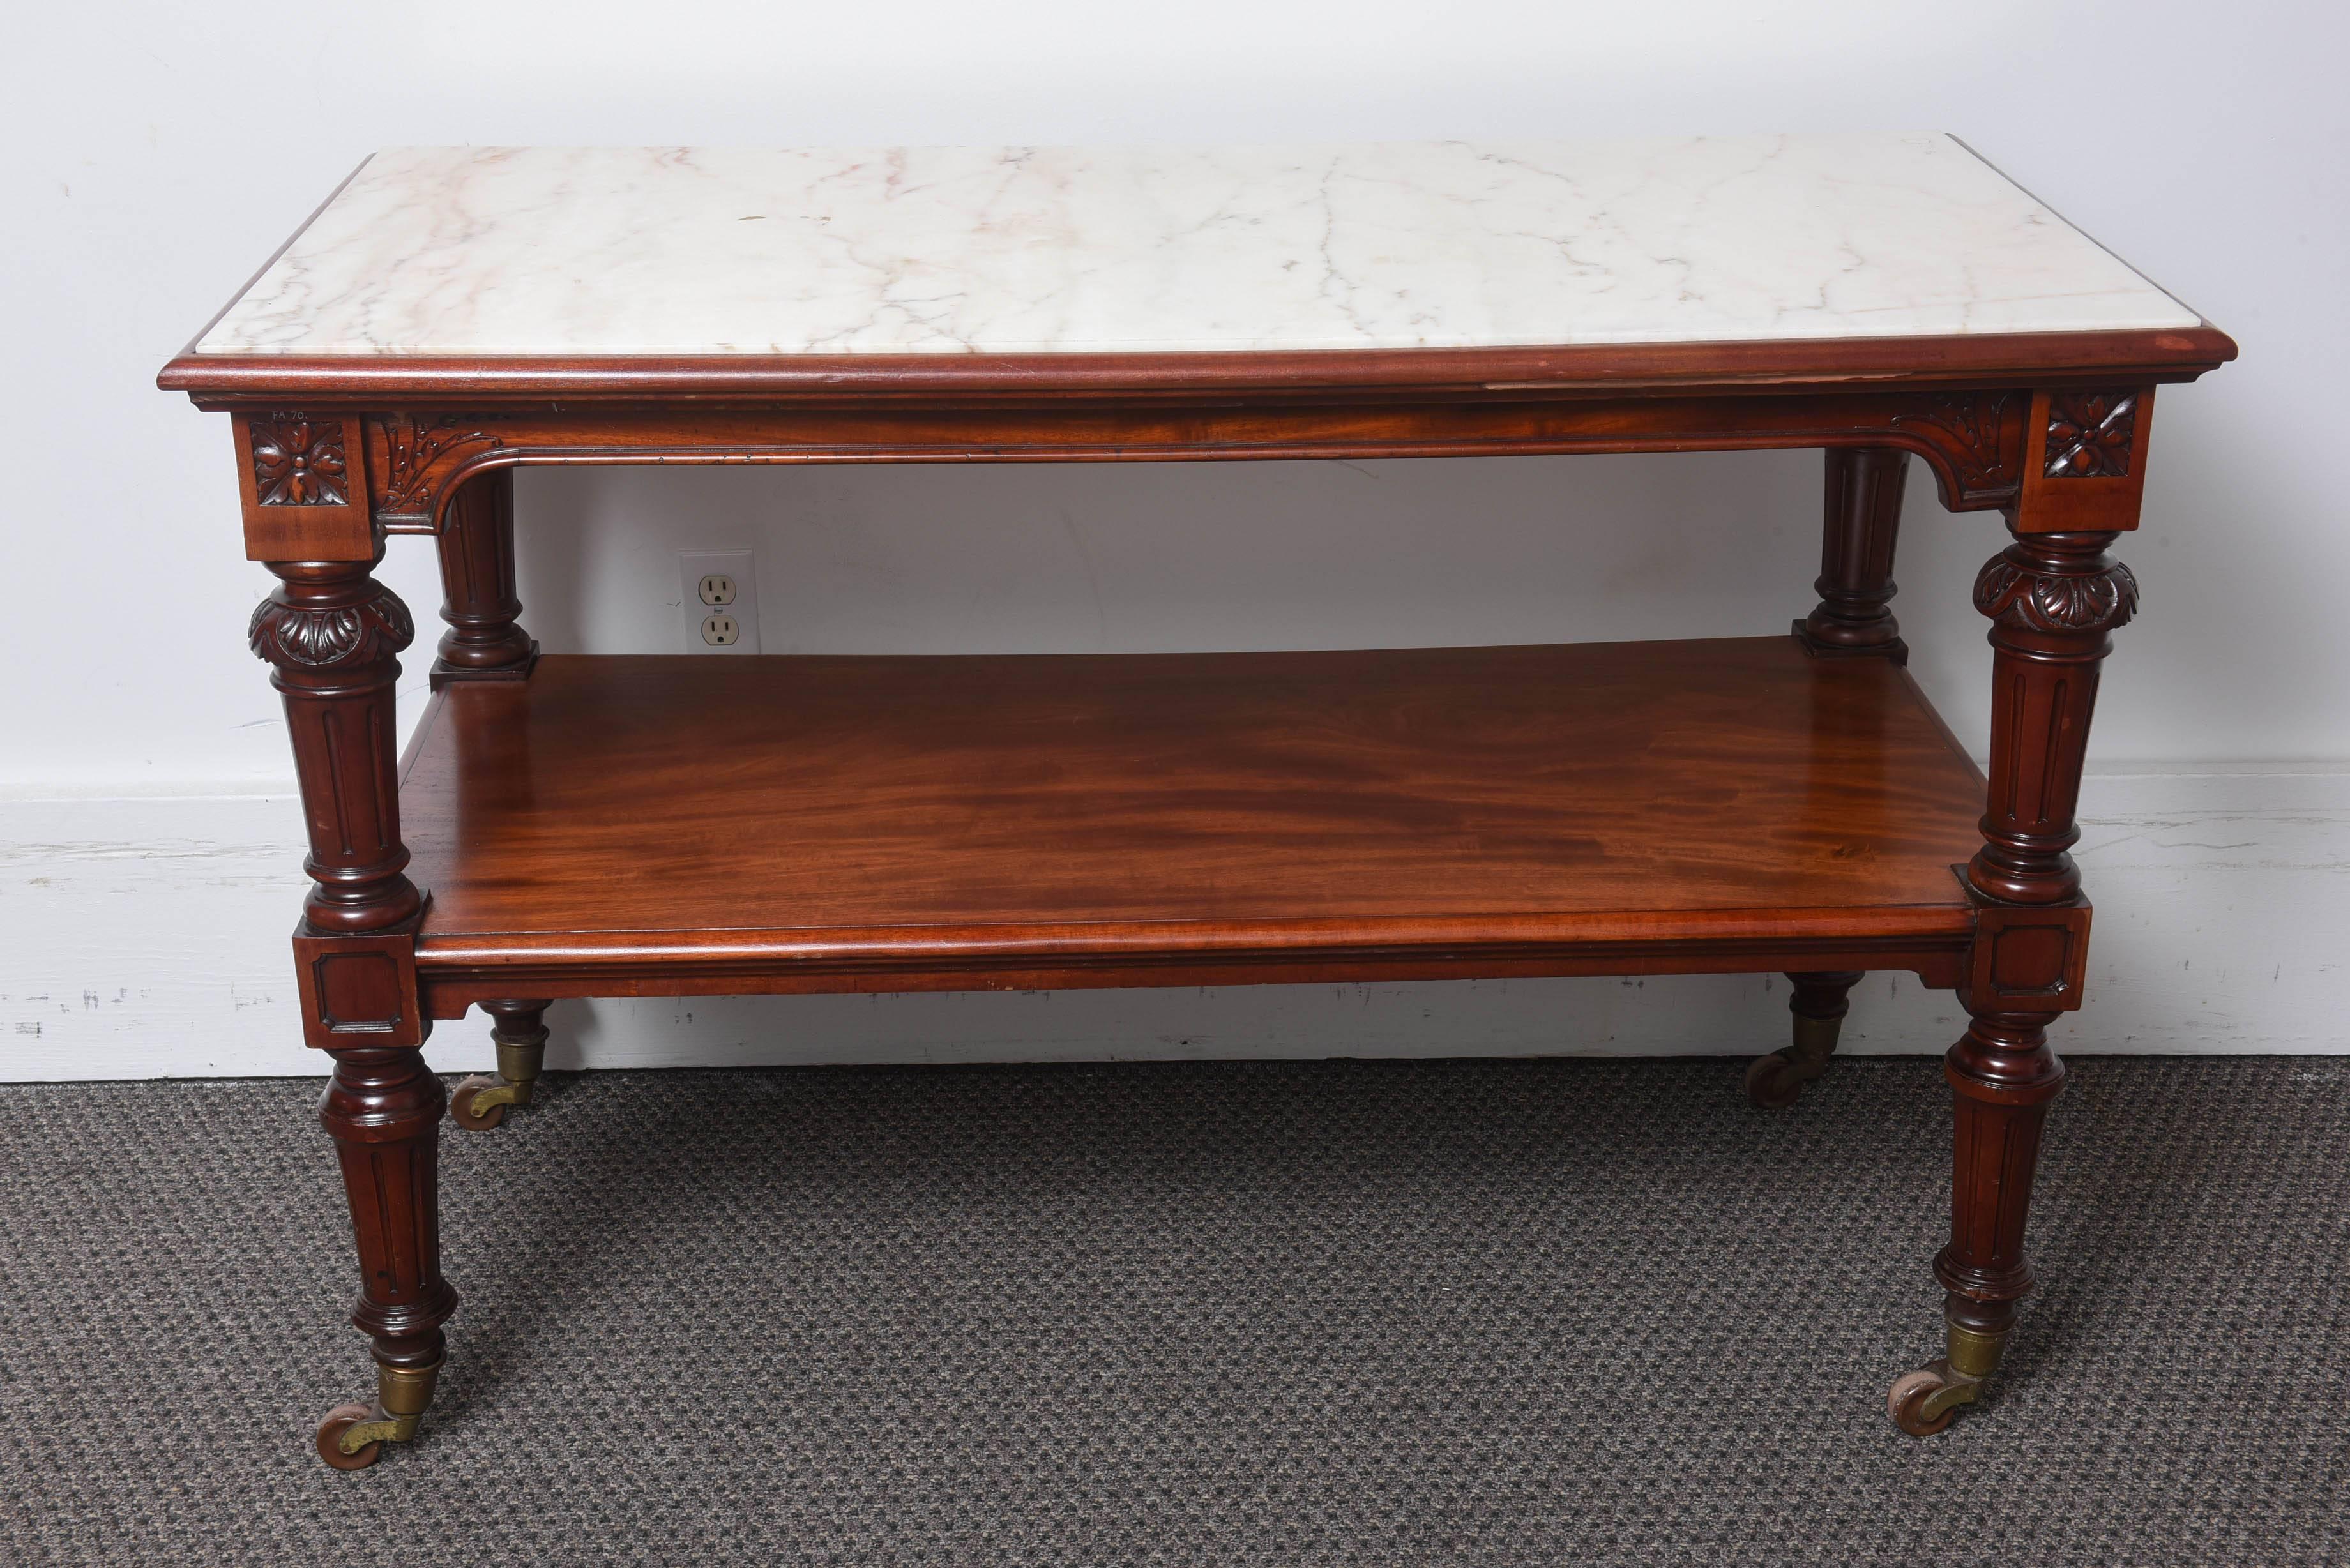 These are an amazing pair of mahogany console tables with a marble top, made in England, circa 1880. The condition is very good, very nice carvings to the fluted leg and the original brass castors to the bottom.
One shelf underneath with the marble